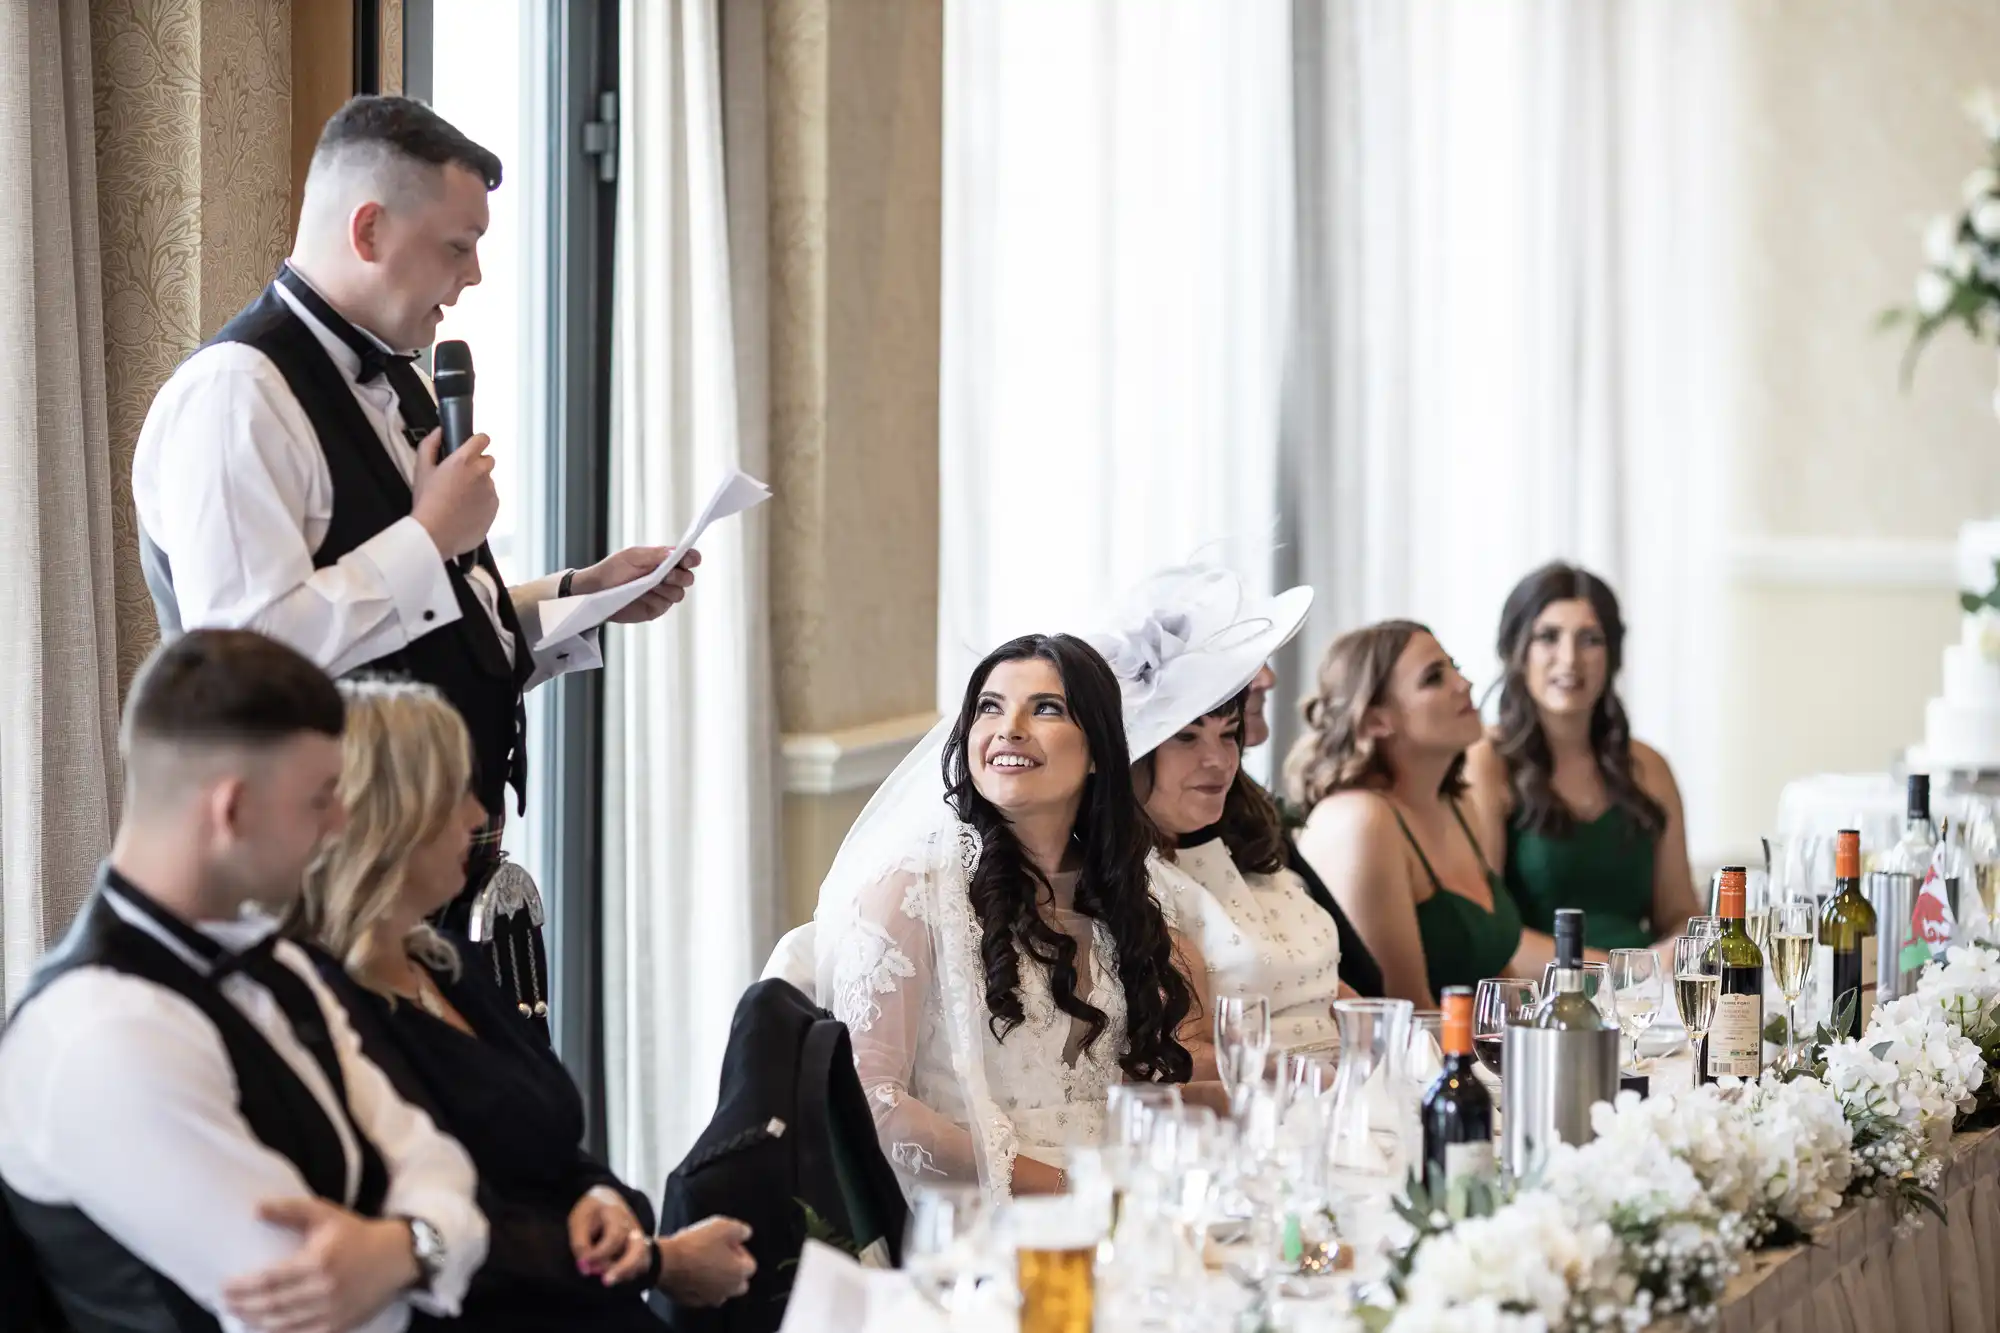 A man in a vest and bow tie gives a speech at a wedding reception, while a bride and guests, seated at a decorated table, listen attentively.